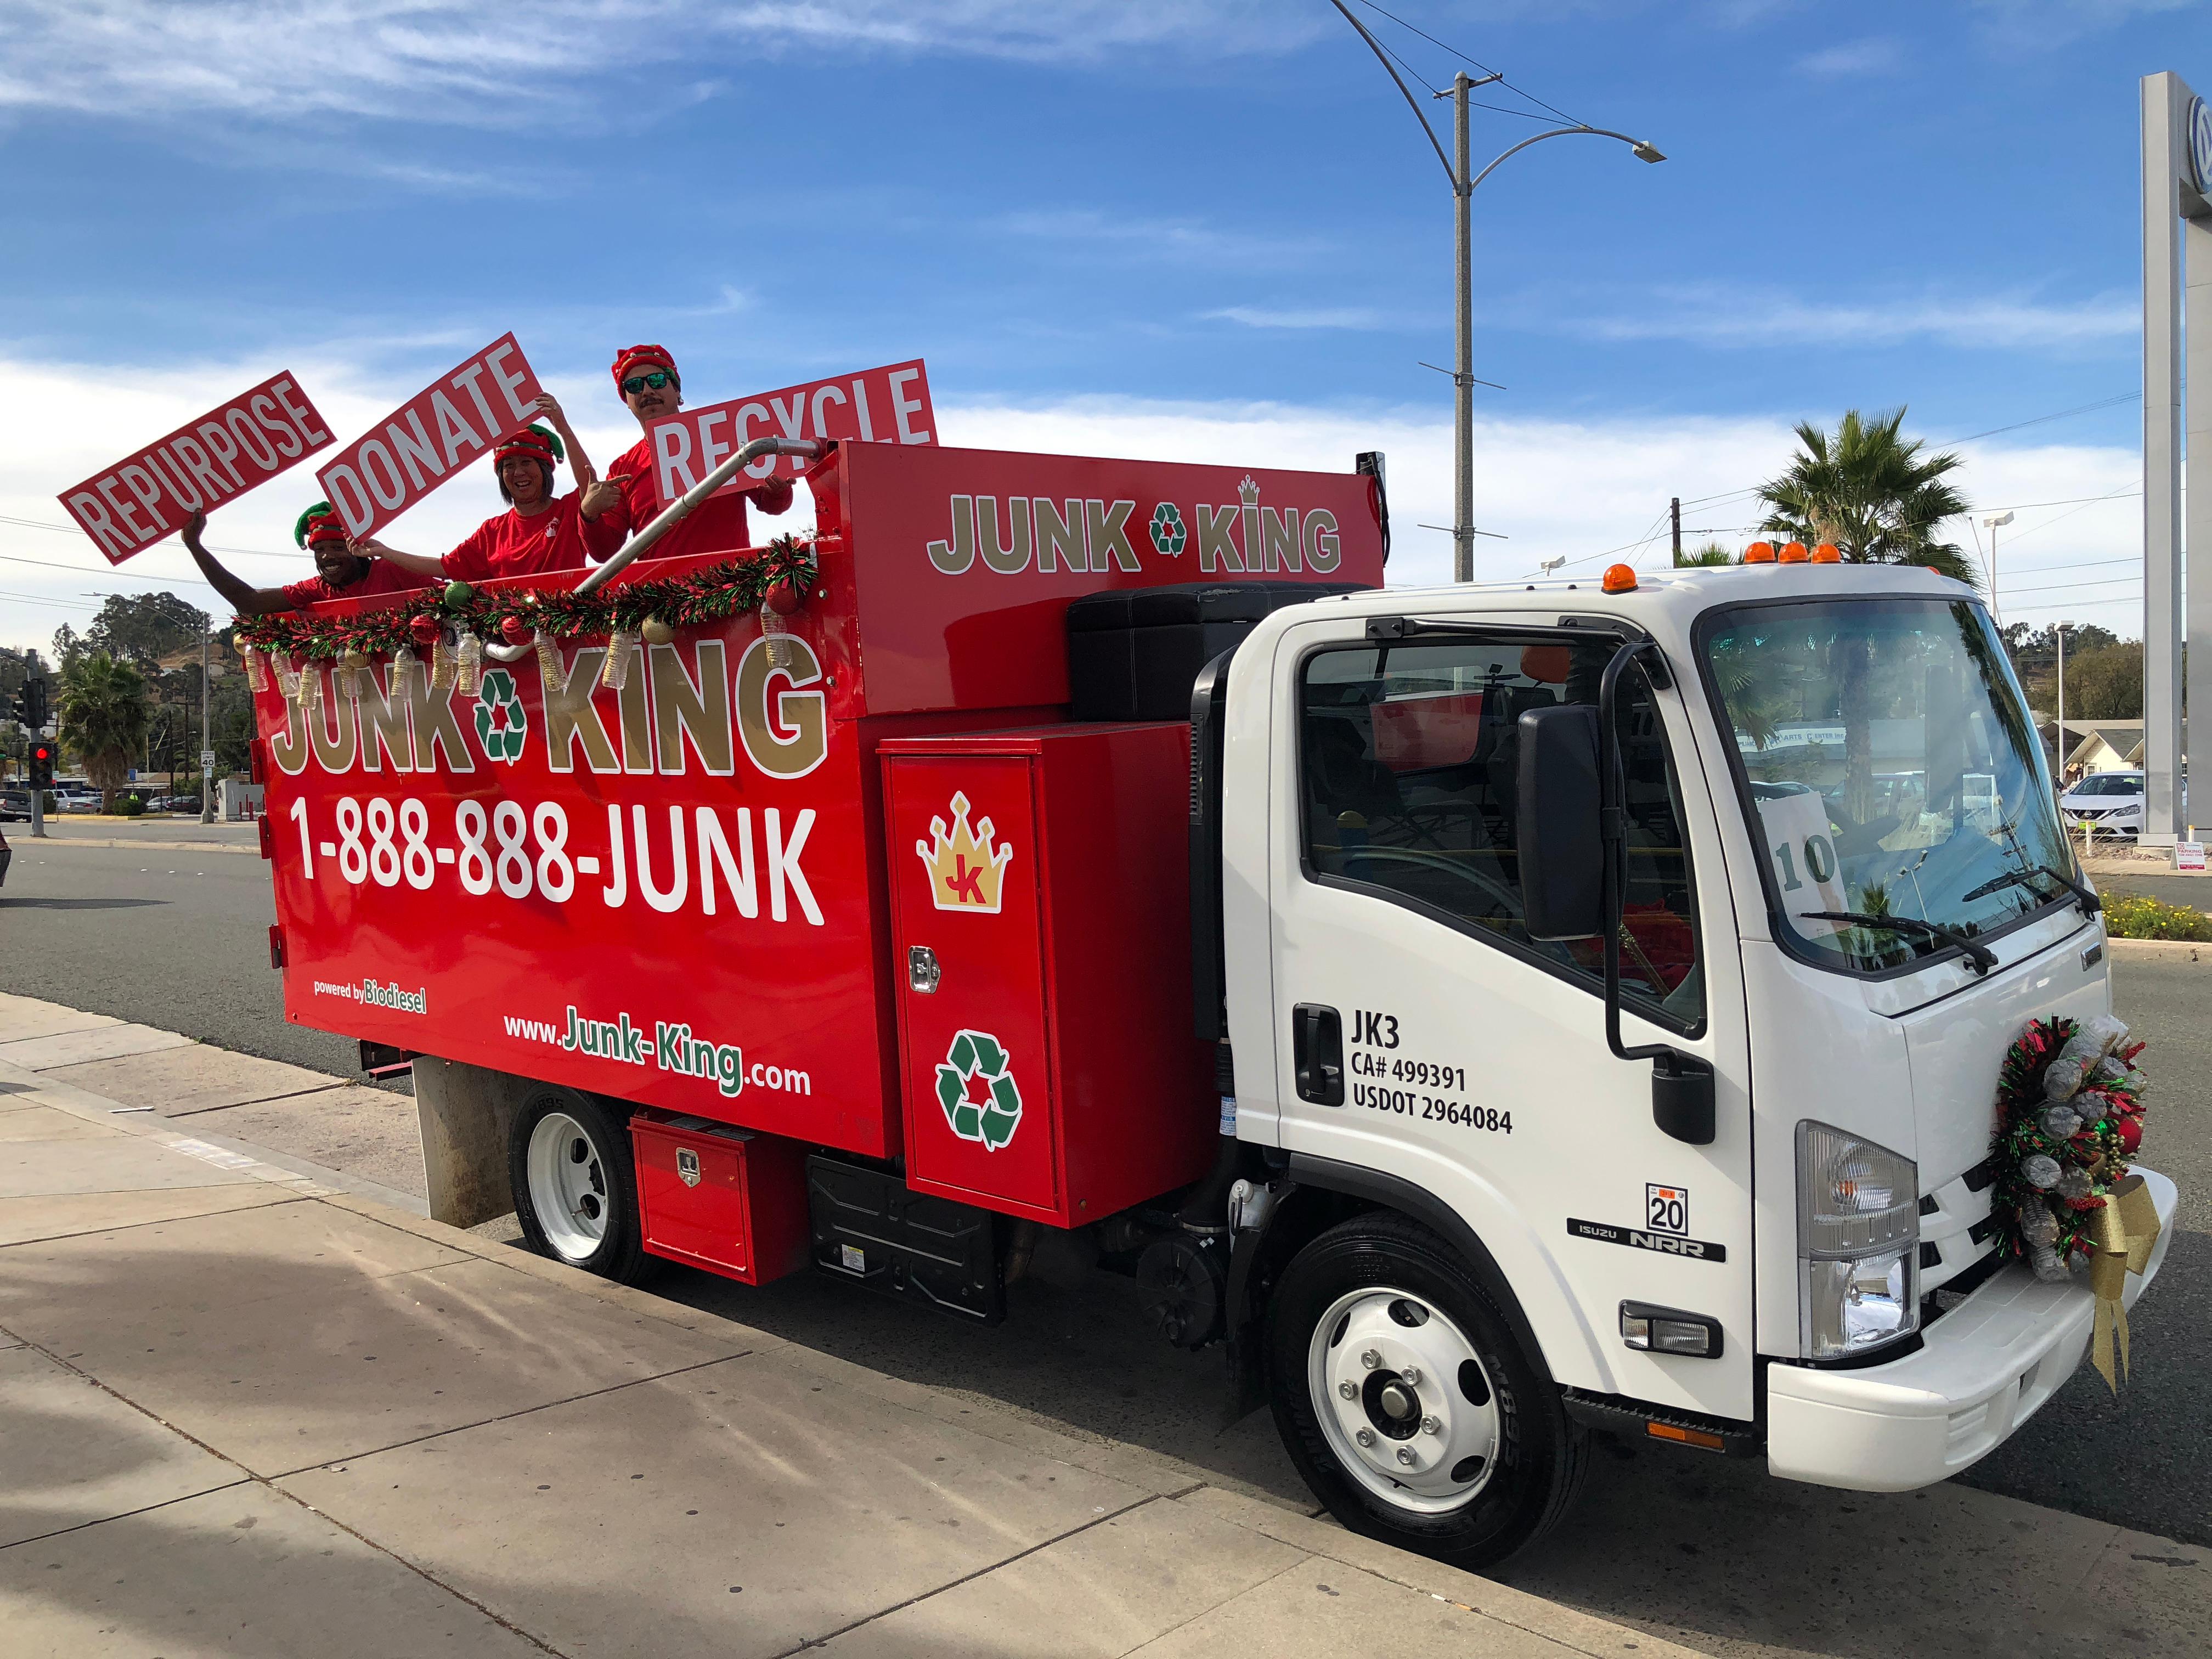 Junk King in the holiday spirit while promoting Recycling, Donating and Repurposing. Keep us in mind when you're ready to book your next junk pick up!